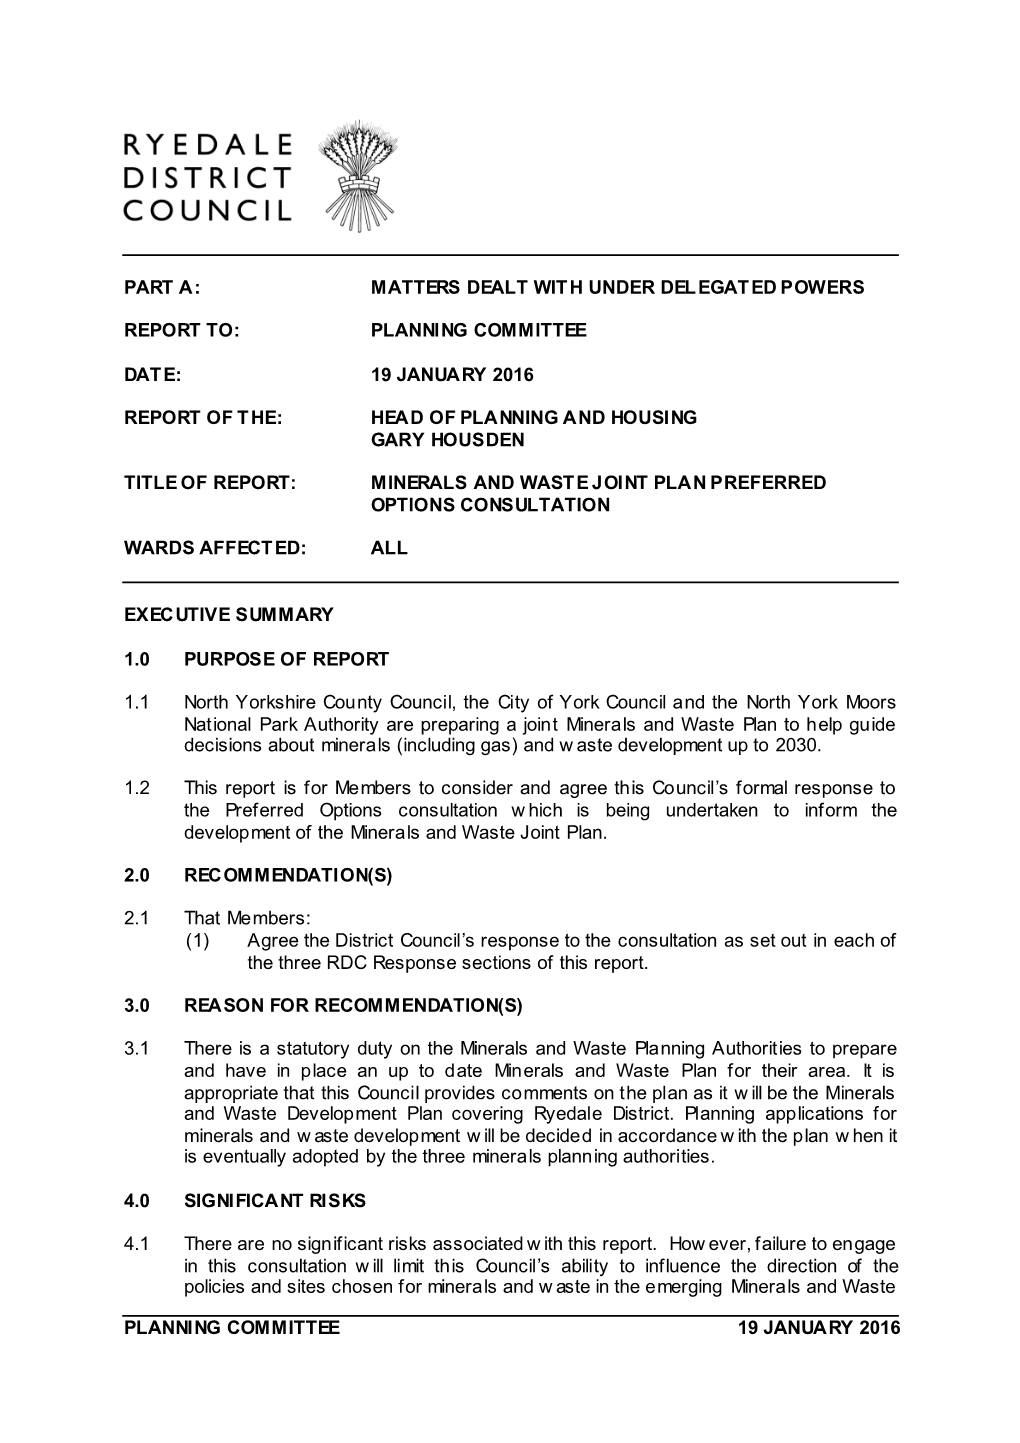 Planning Committee 19 January 2016 Part A